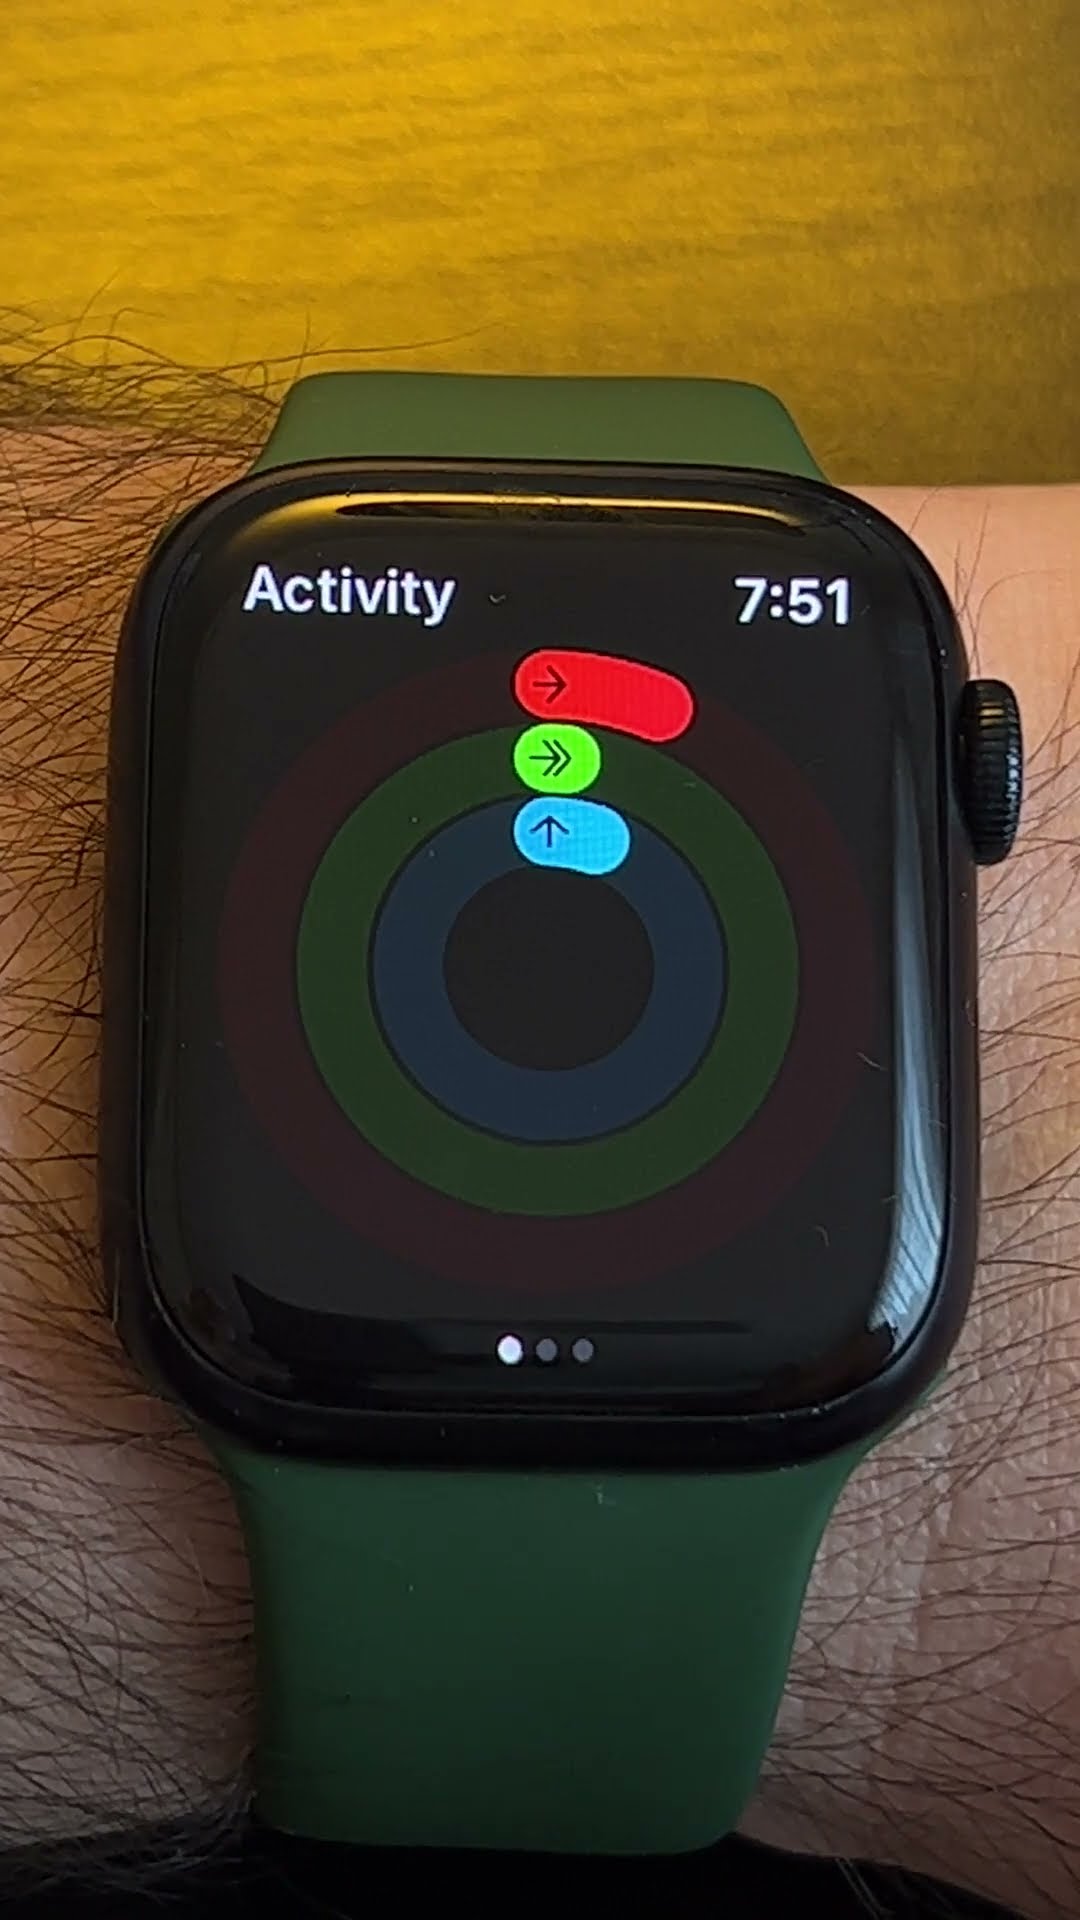 Apple Watch activity and workout apps explained #applewatch #workout #healthy #apple #shorts